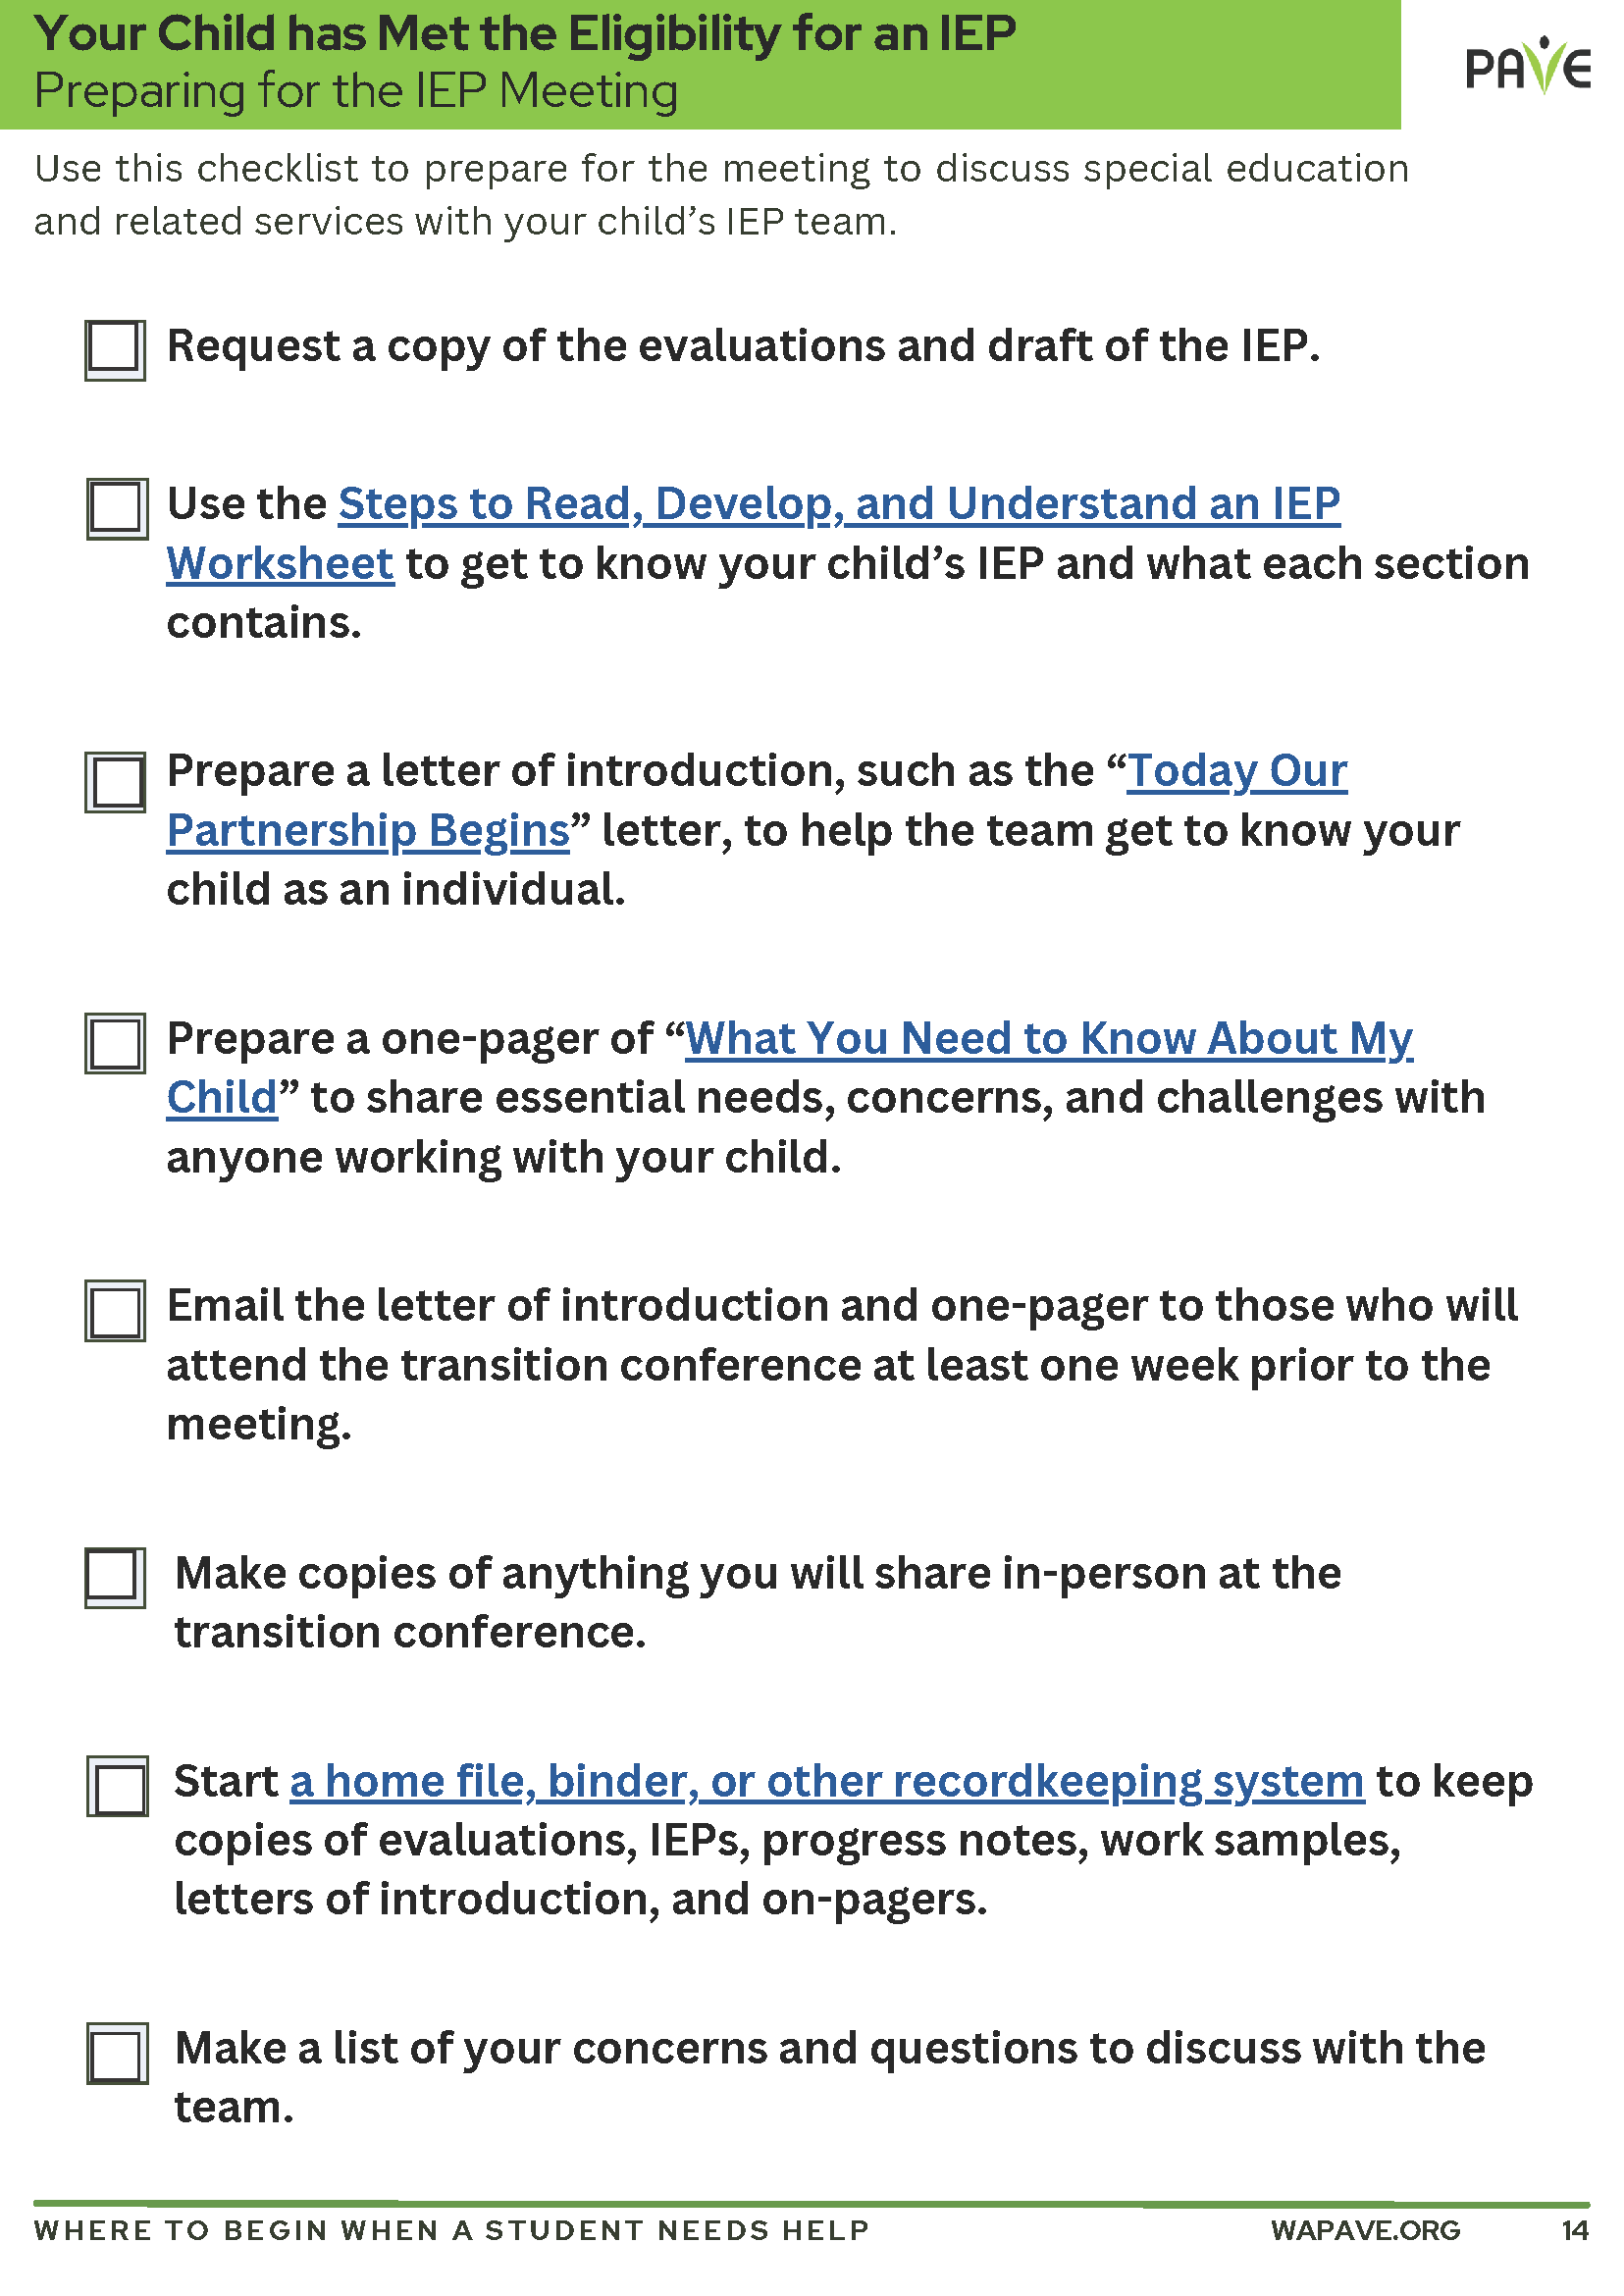 Preparing for the IEP Meeting Checklist